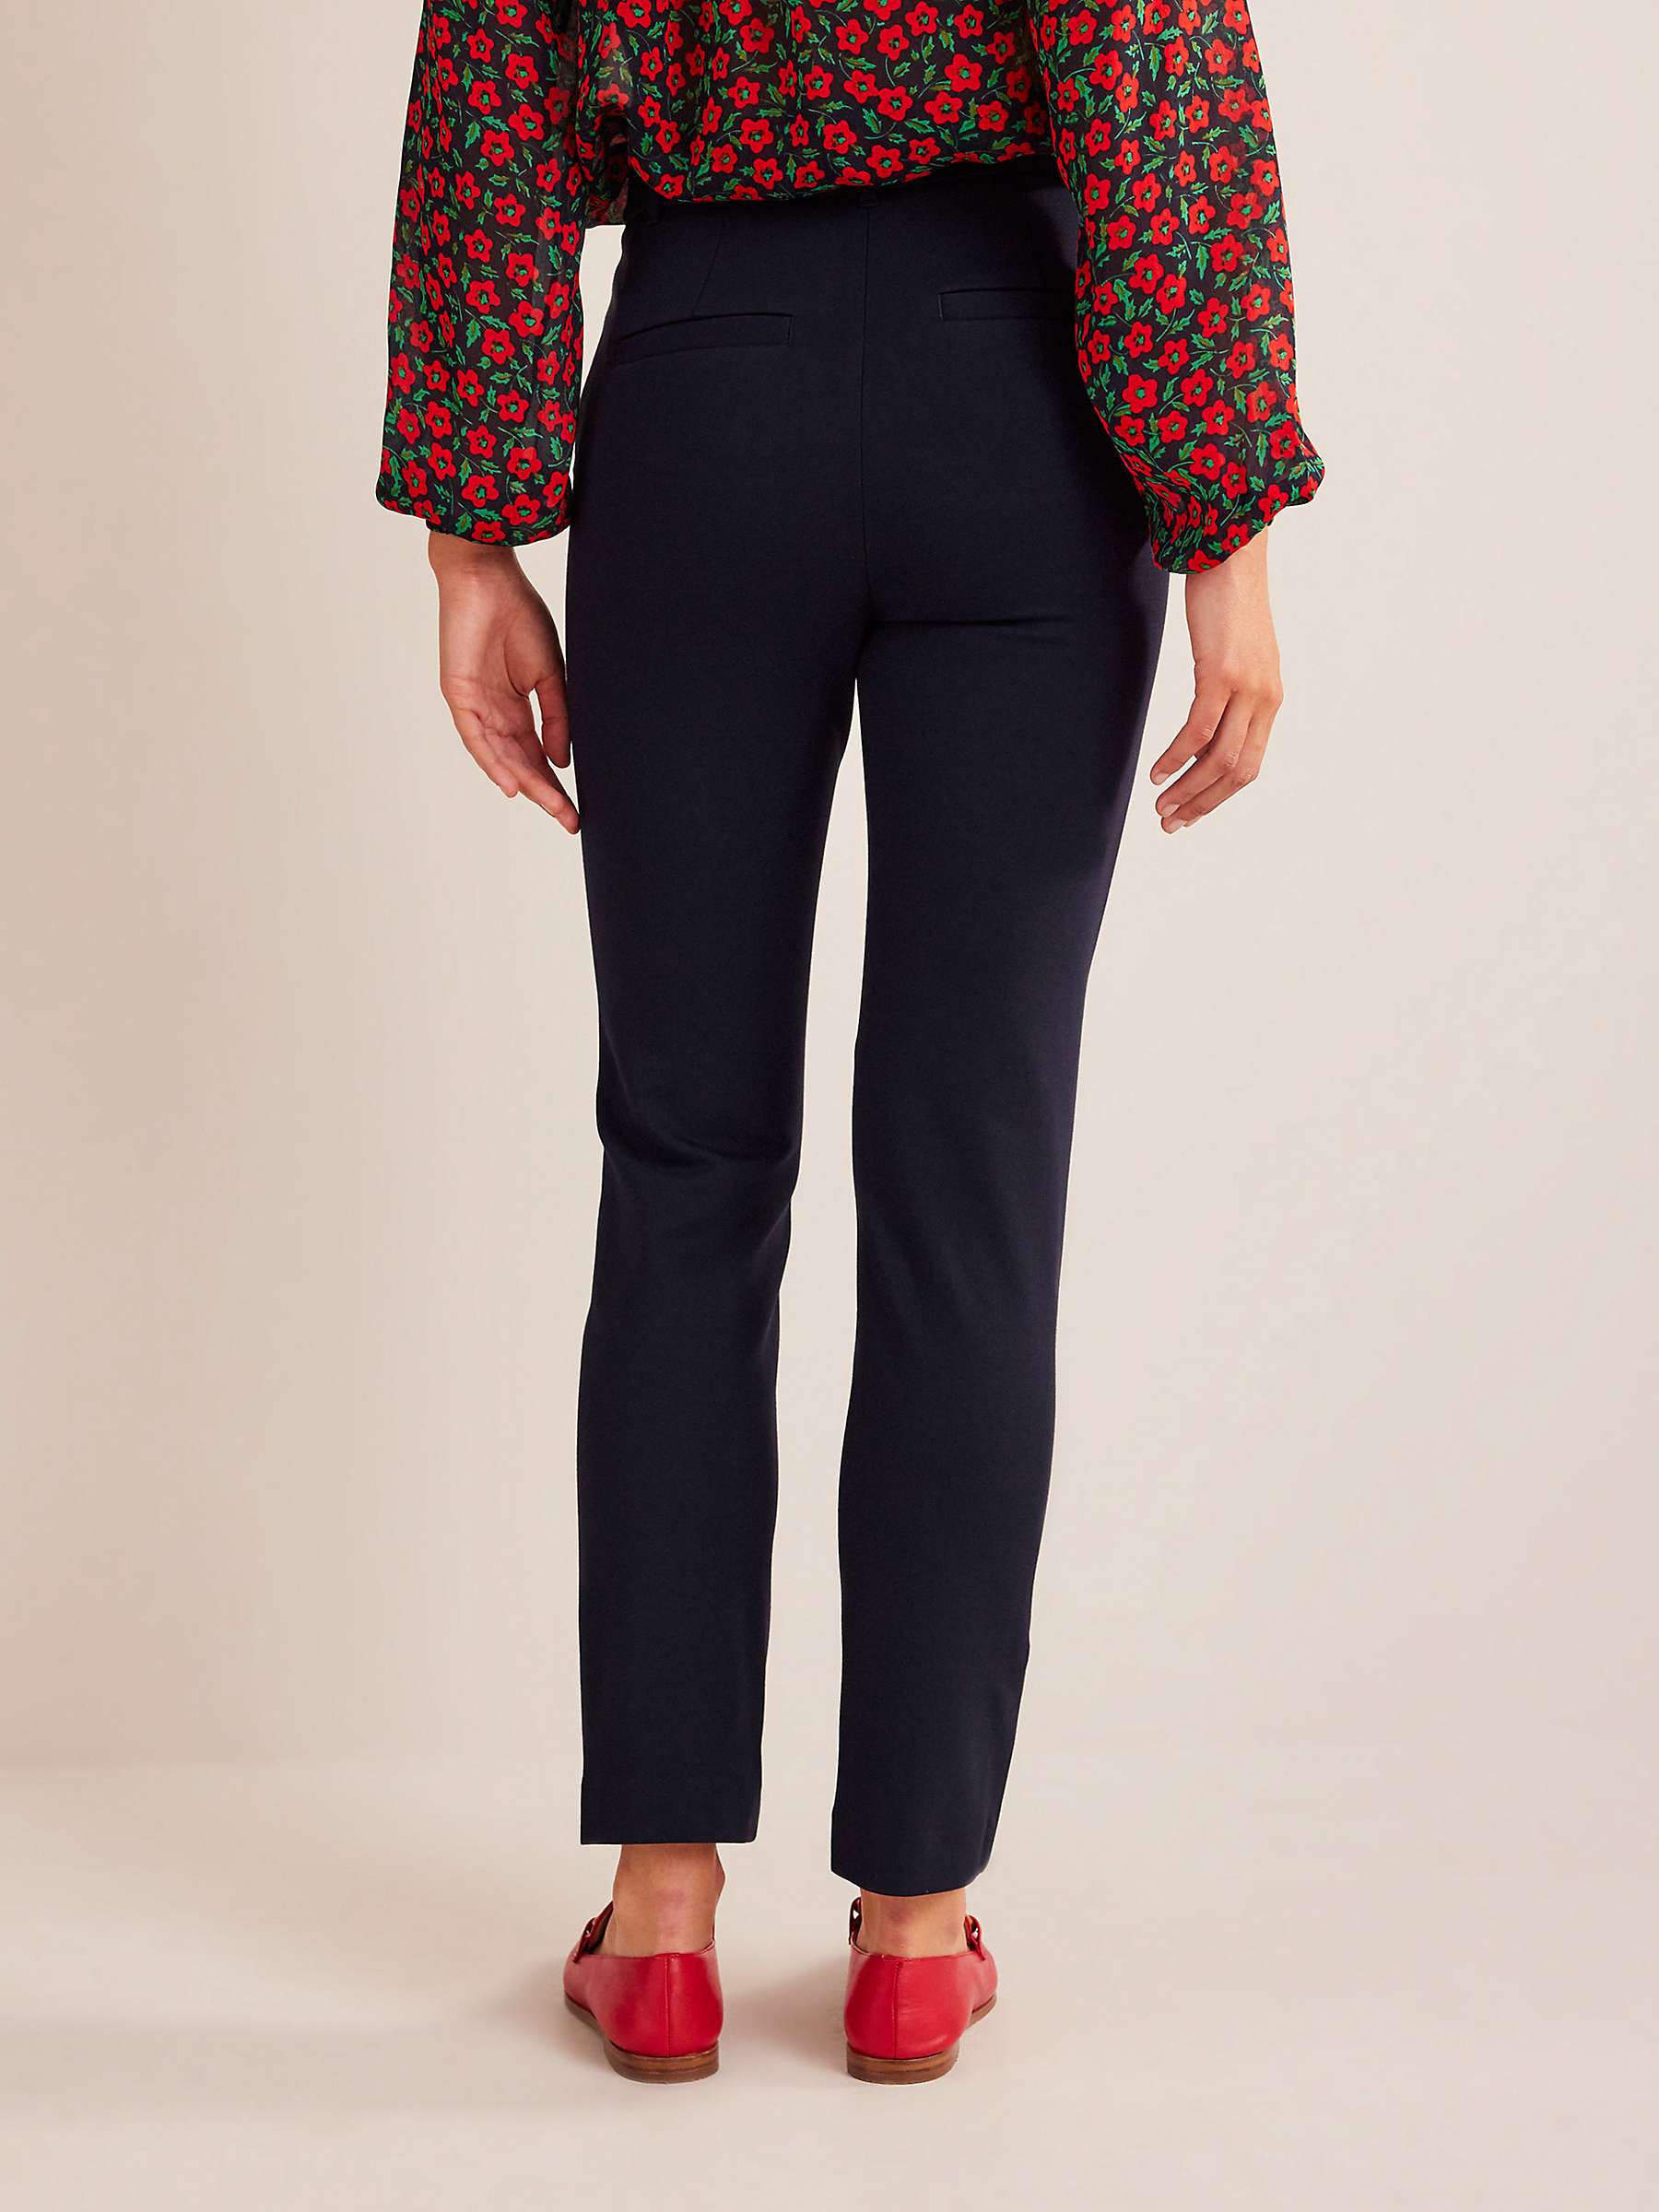 Buy Boden Highgate Jersey Trousers, Navy Online at johnlewis.com